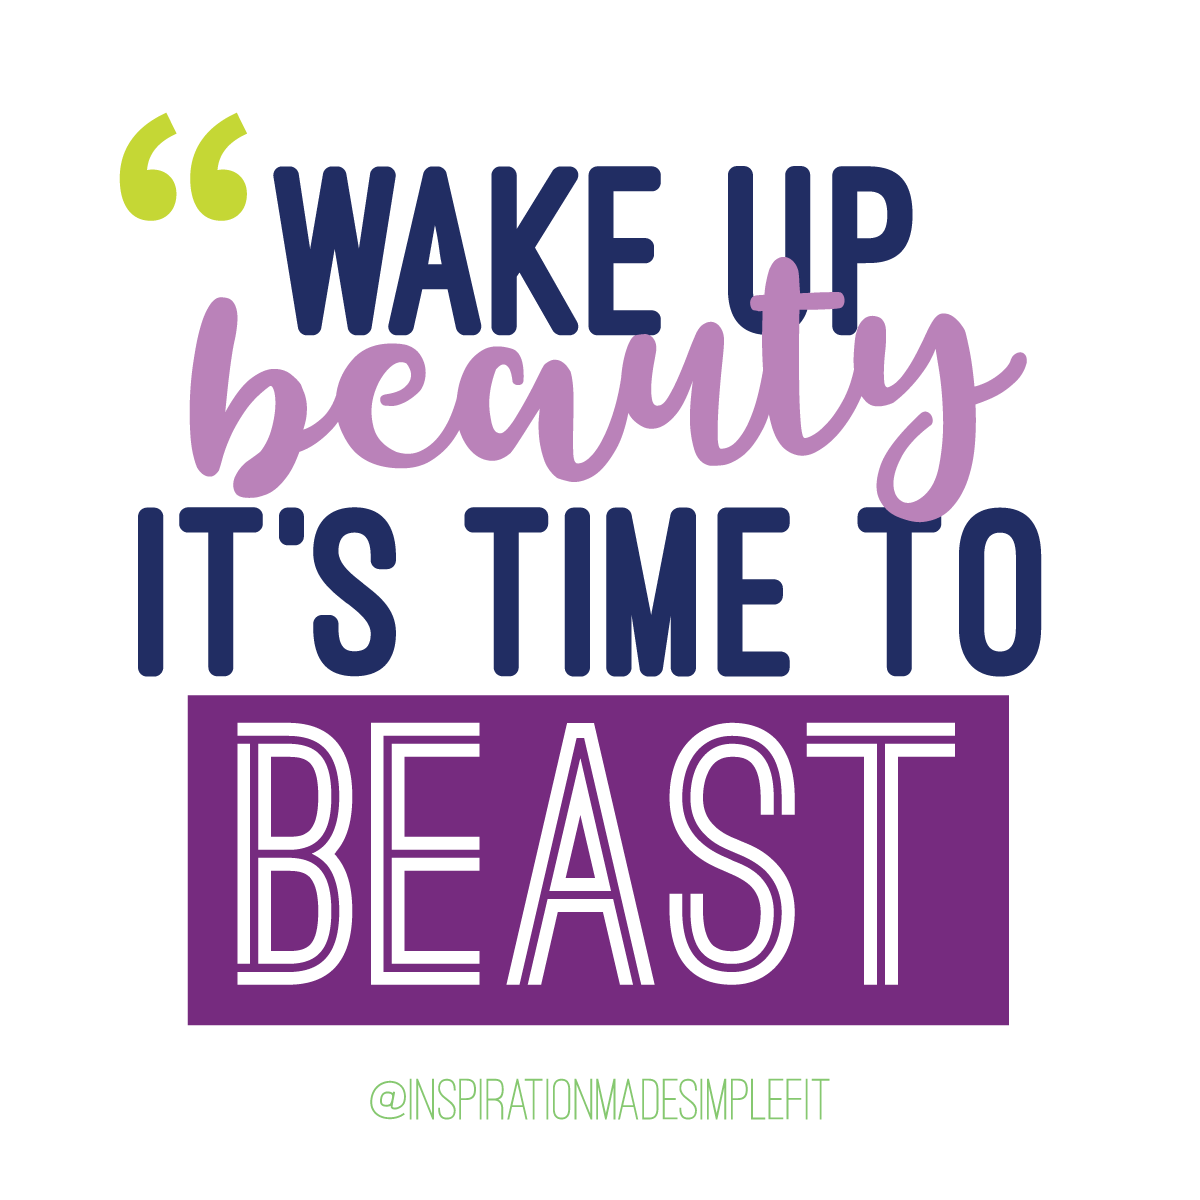 Wake up beauty, it's time to BEAST!